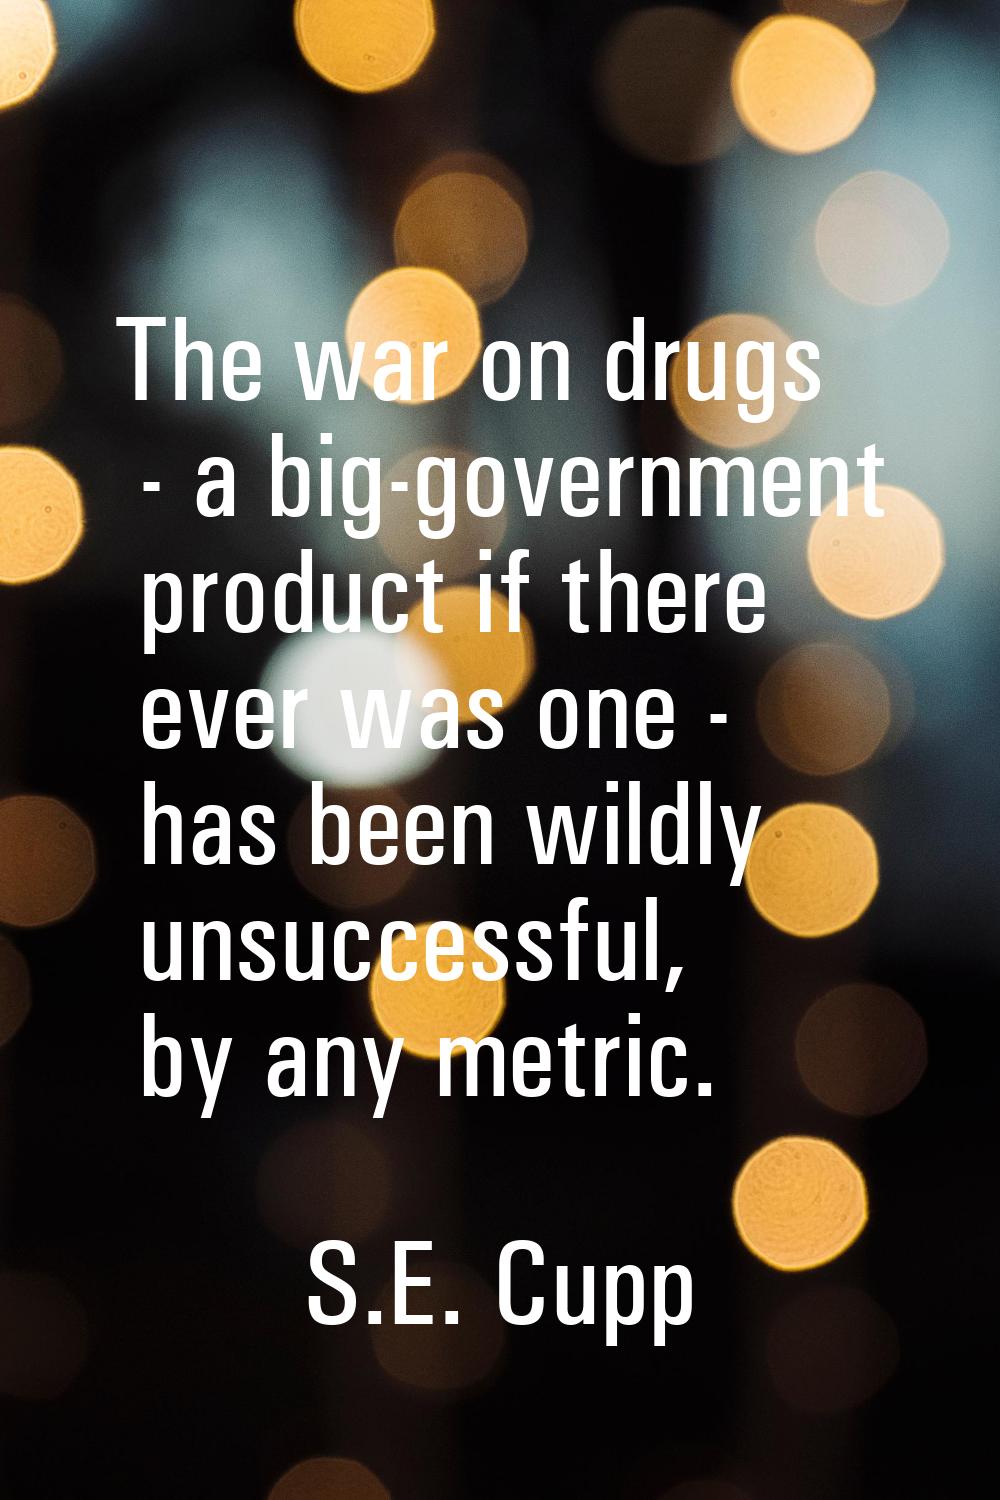 The war on drugs - a big-government product if there ever was one - has been wildly unsuccessful, b